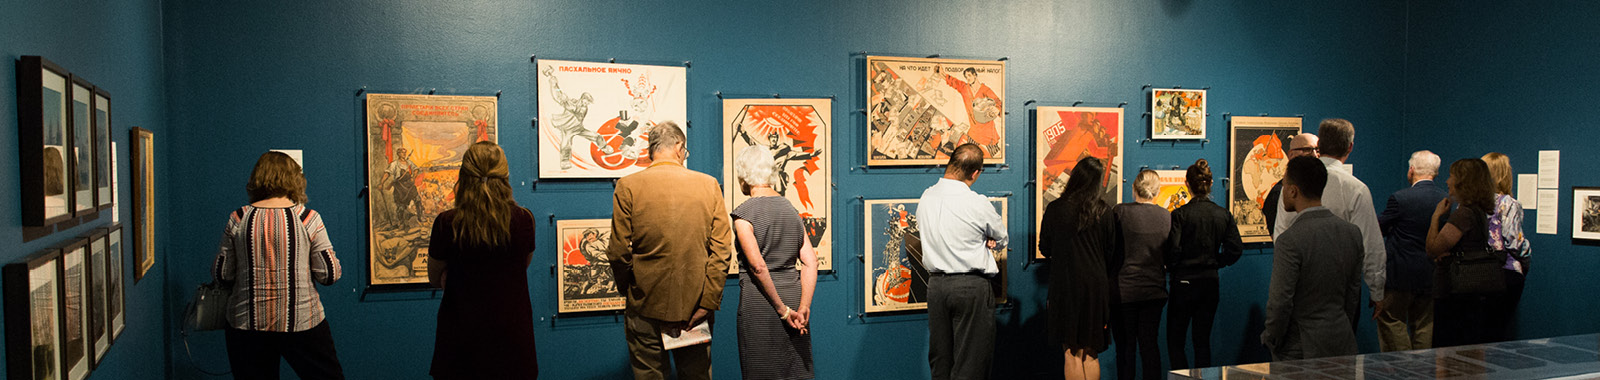 Visitors in exhibit gallery looking at Russian Revolution posters